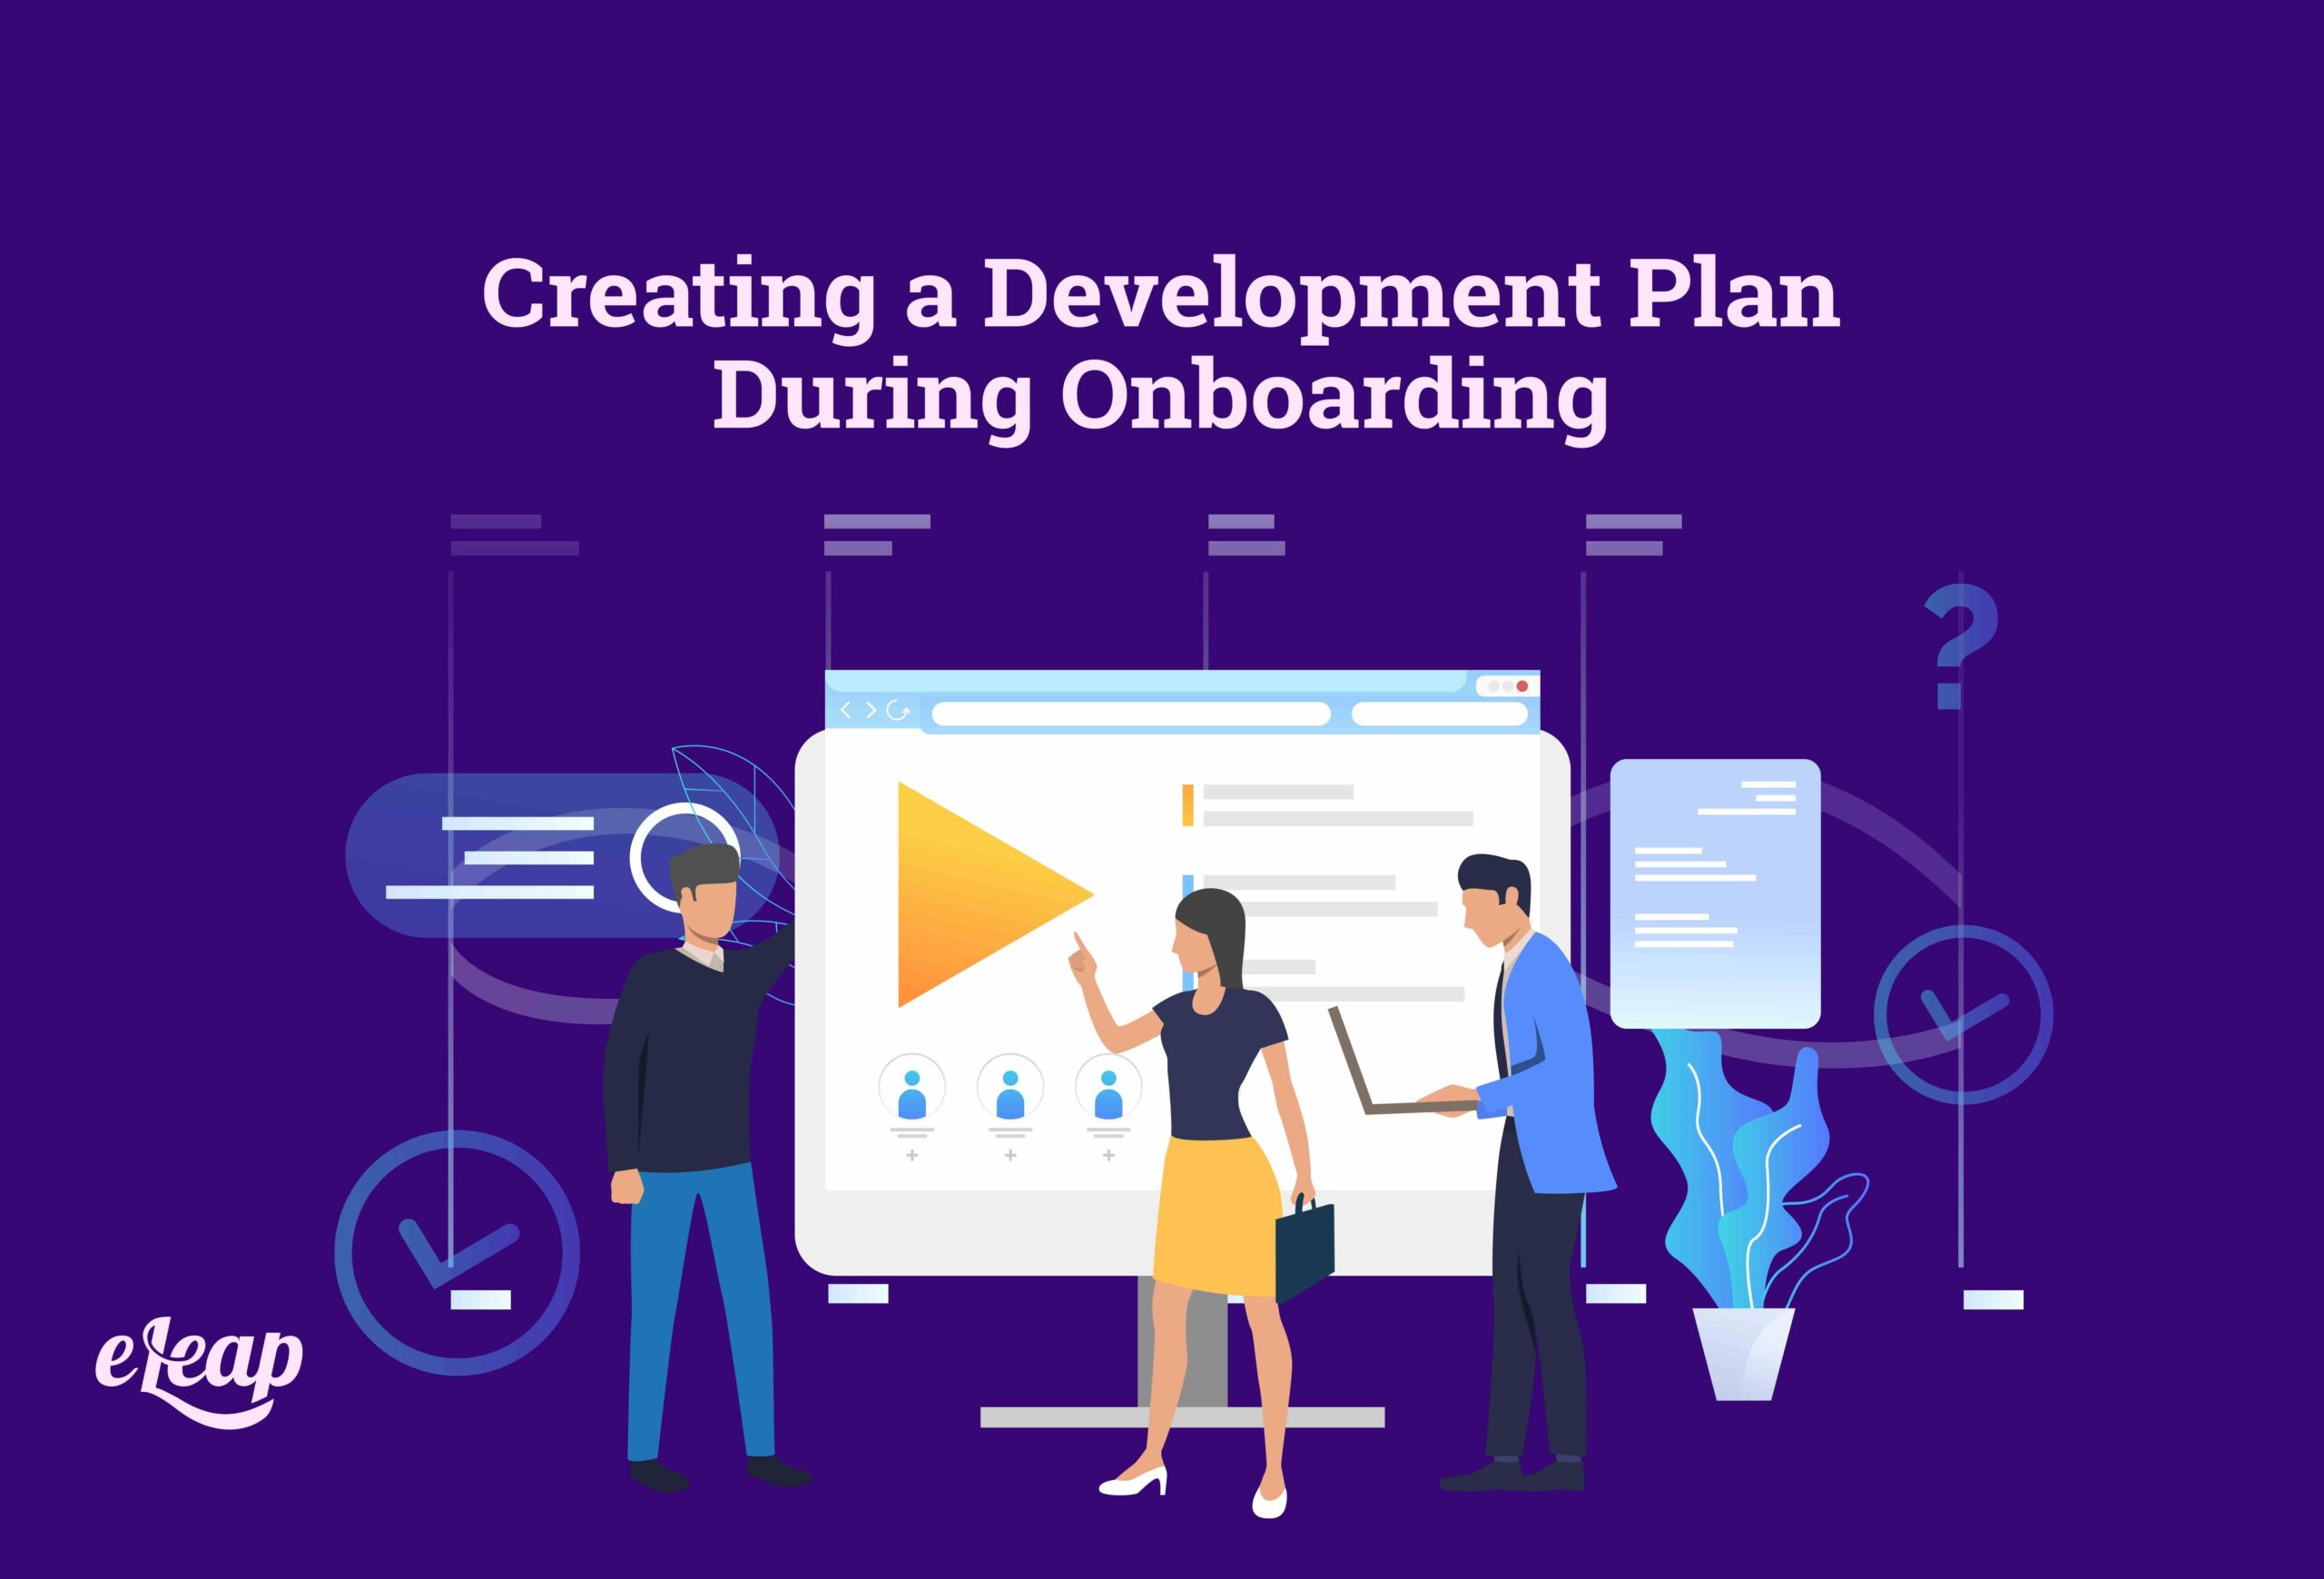 Creating a Development Plan During Onboarding